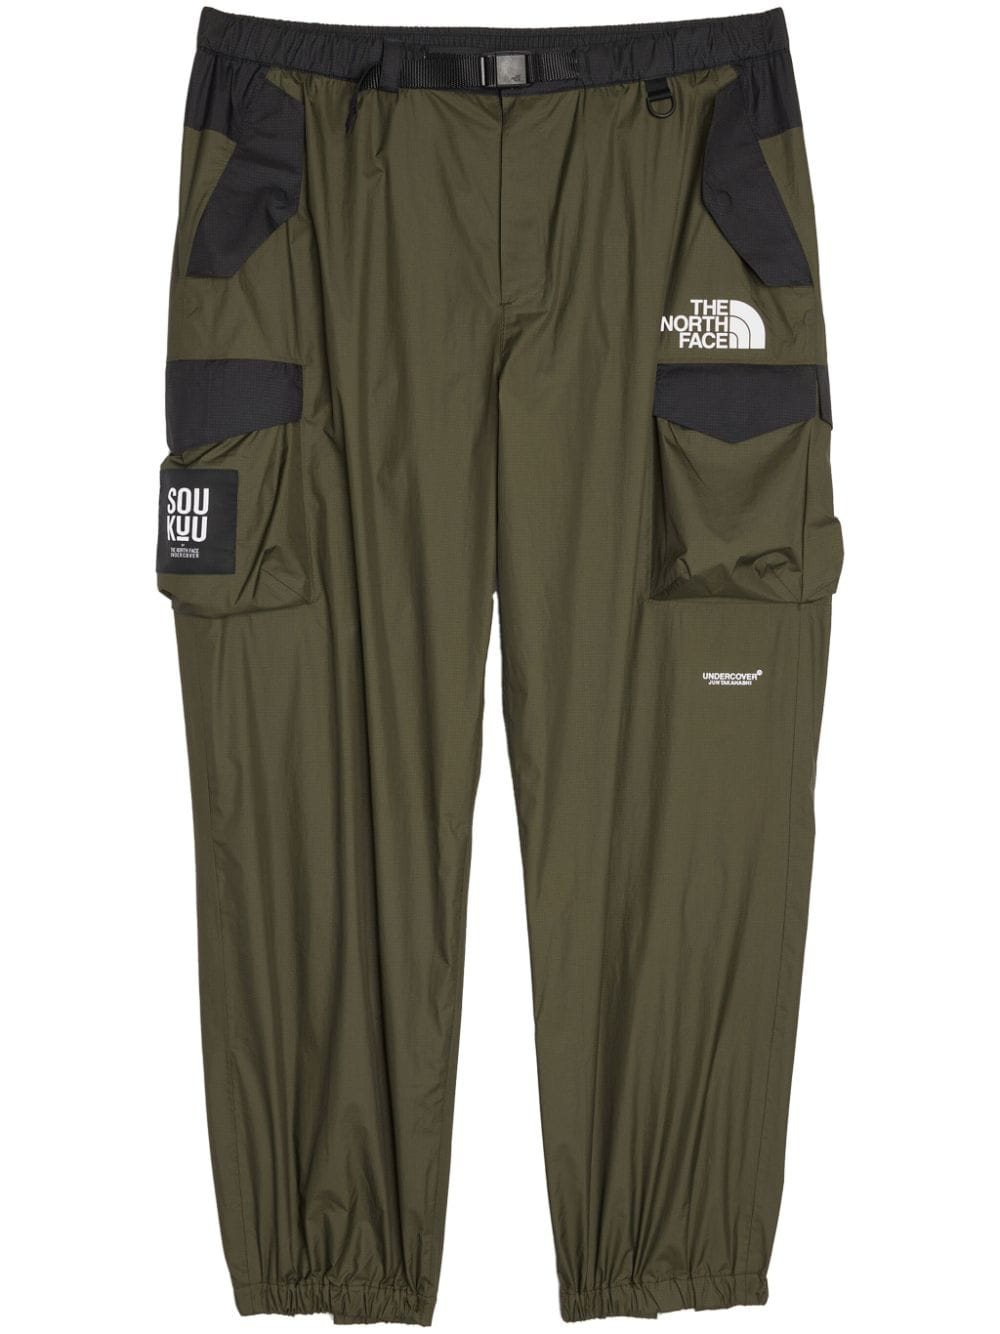 The North Face x Undercover belted track pants - Green von The North Face